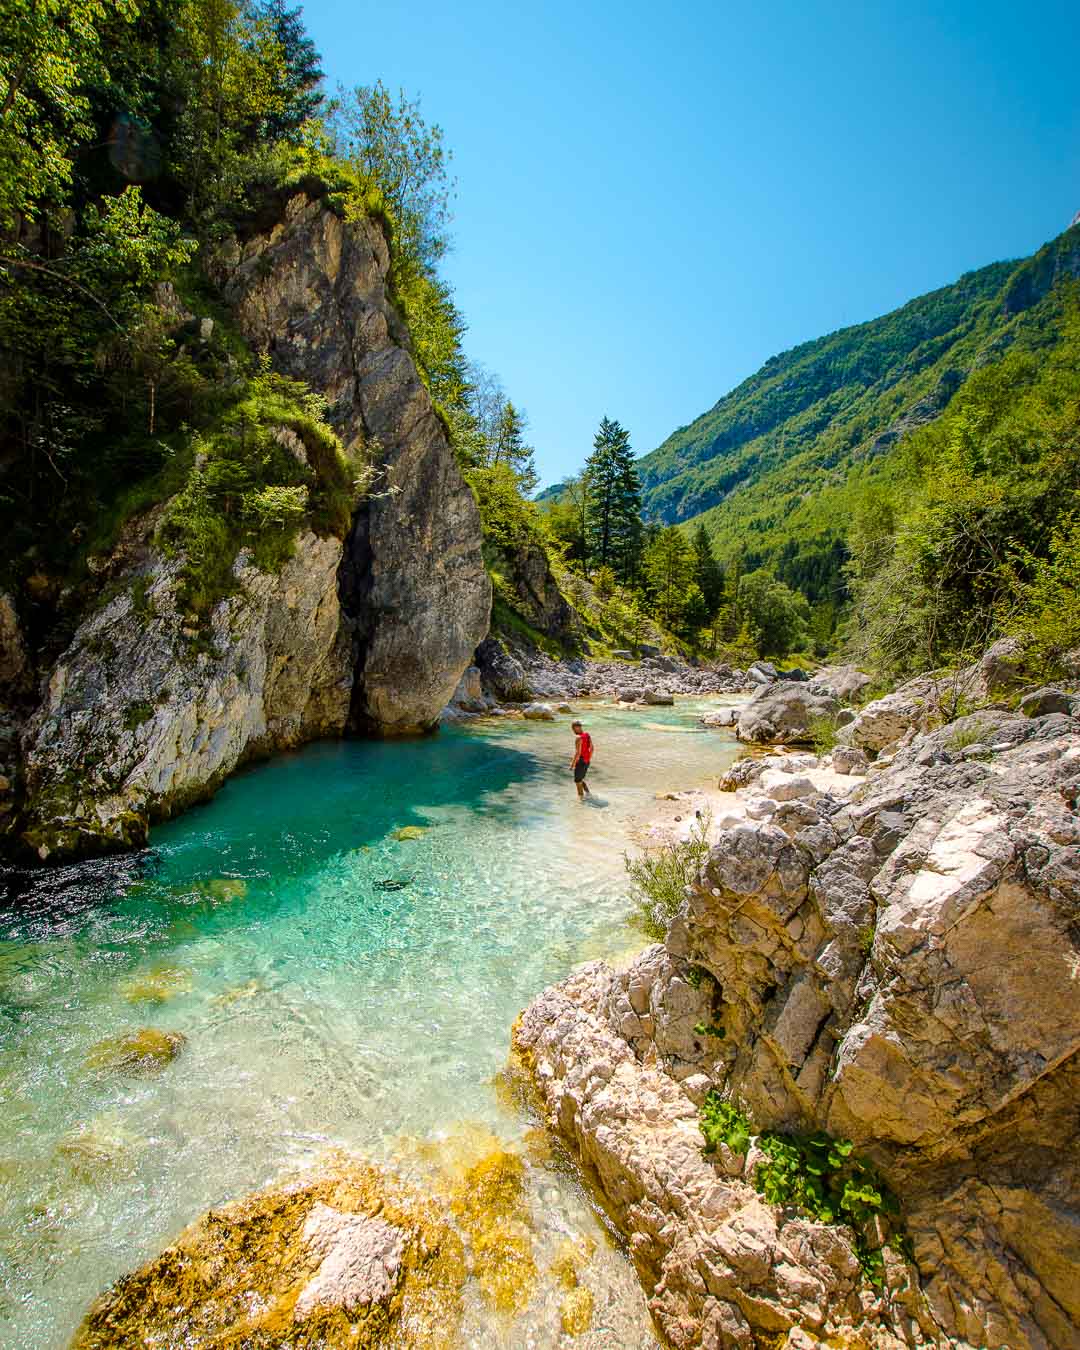 Crystal clear water of the Soca river